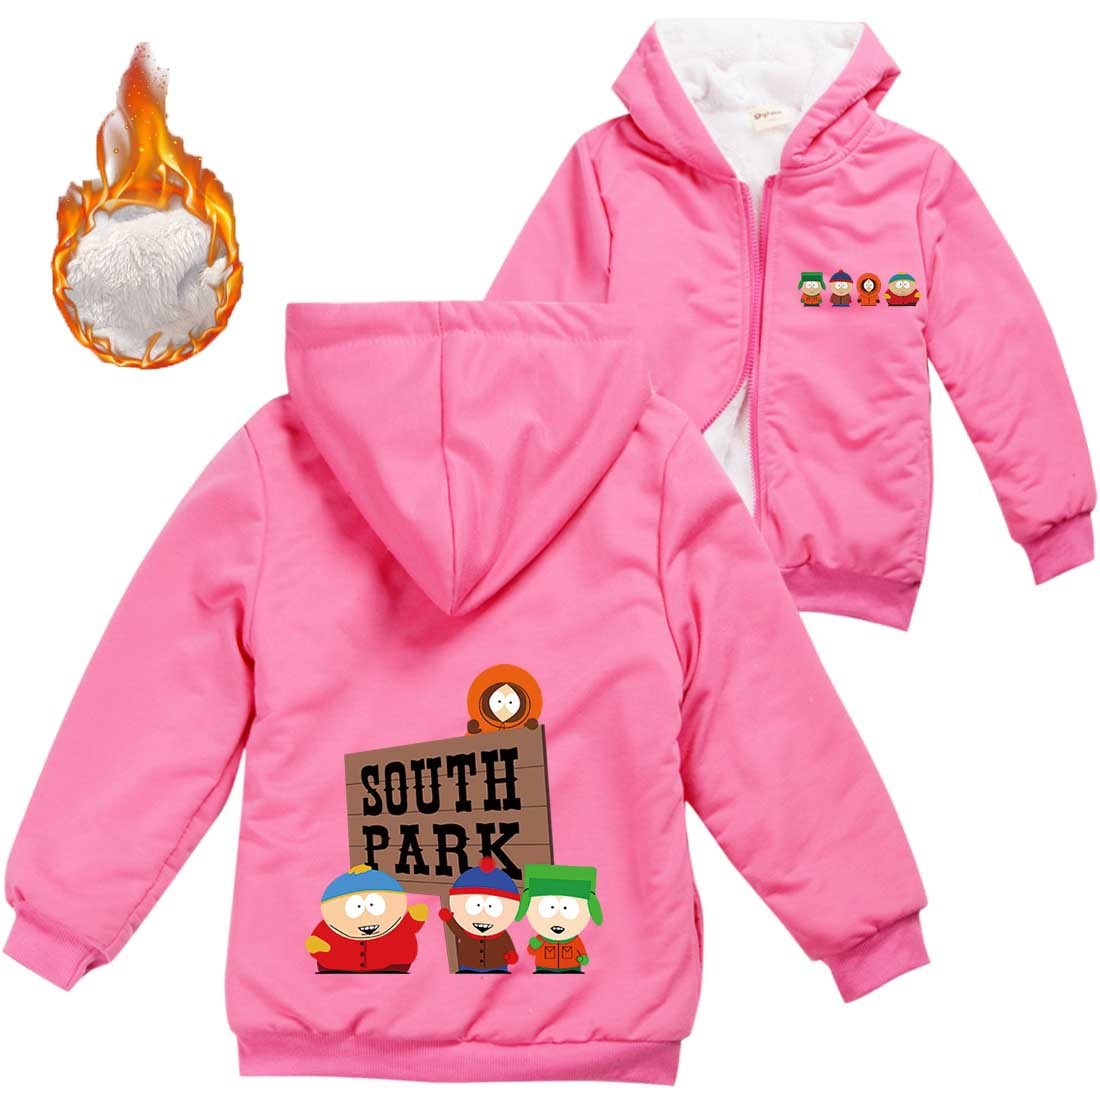 Anime S Southes Park Clothes Kids Warm Thick Velvet Hoody Jacket Teenager Boys Clothes Baby Girls - South Park Plush